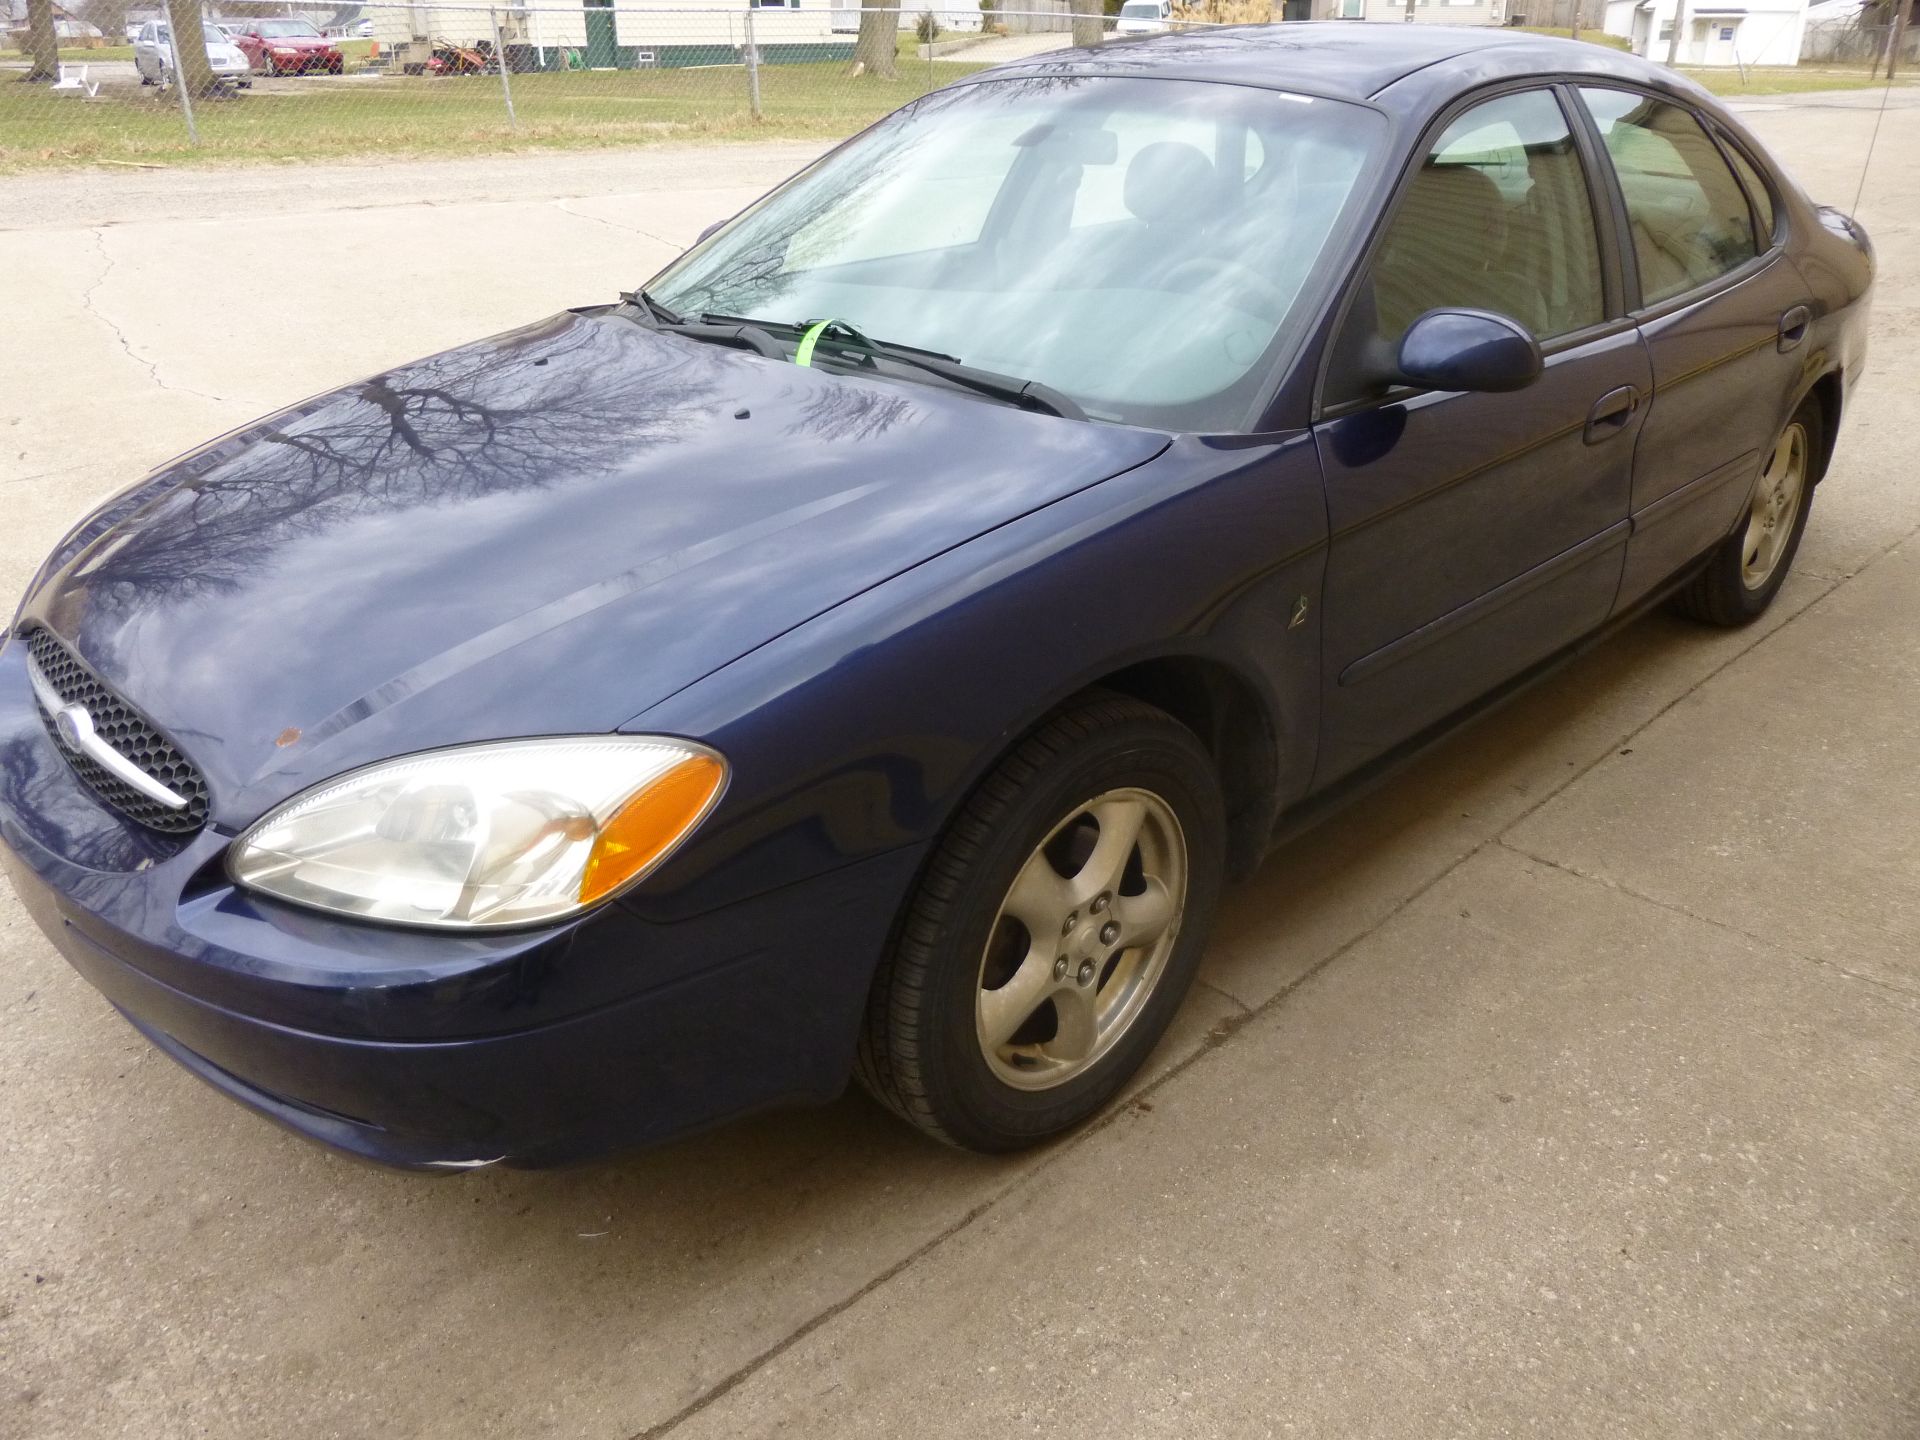 2002 Ford Taurus Municipally maintained Miles 92930 Vin # 1FAFP532X2G180779 CLEAR TITLE(located at - Image 4 of 12